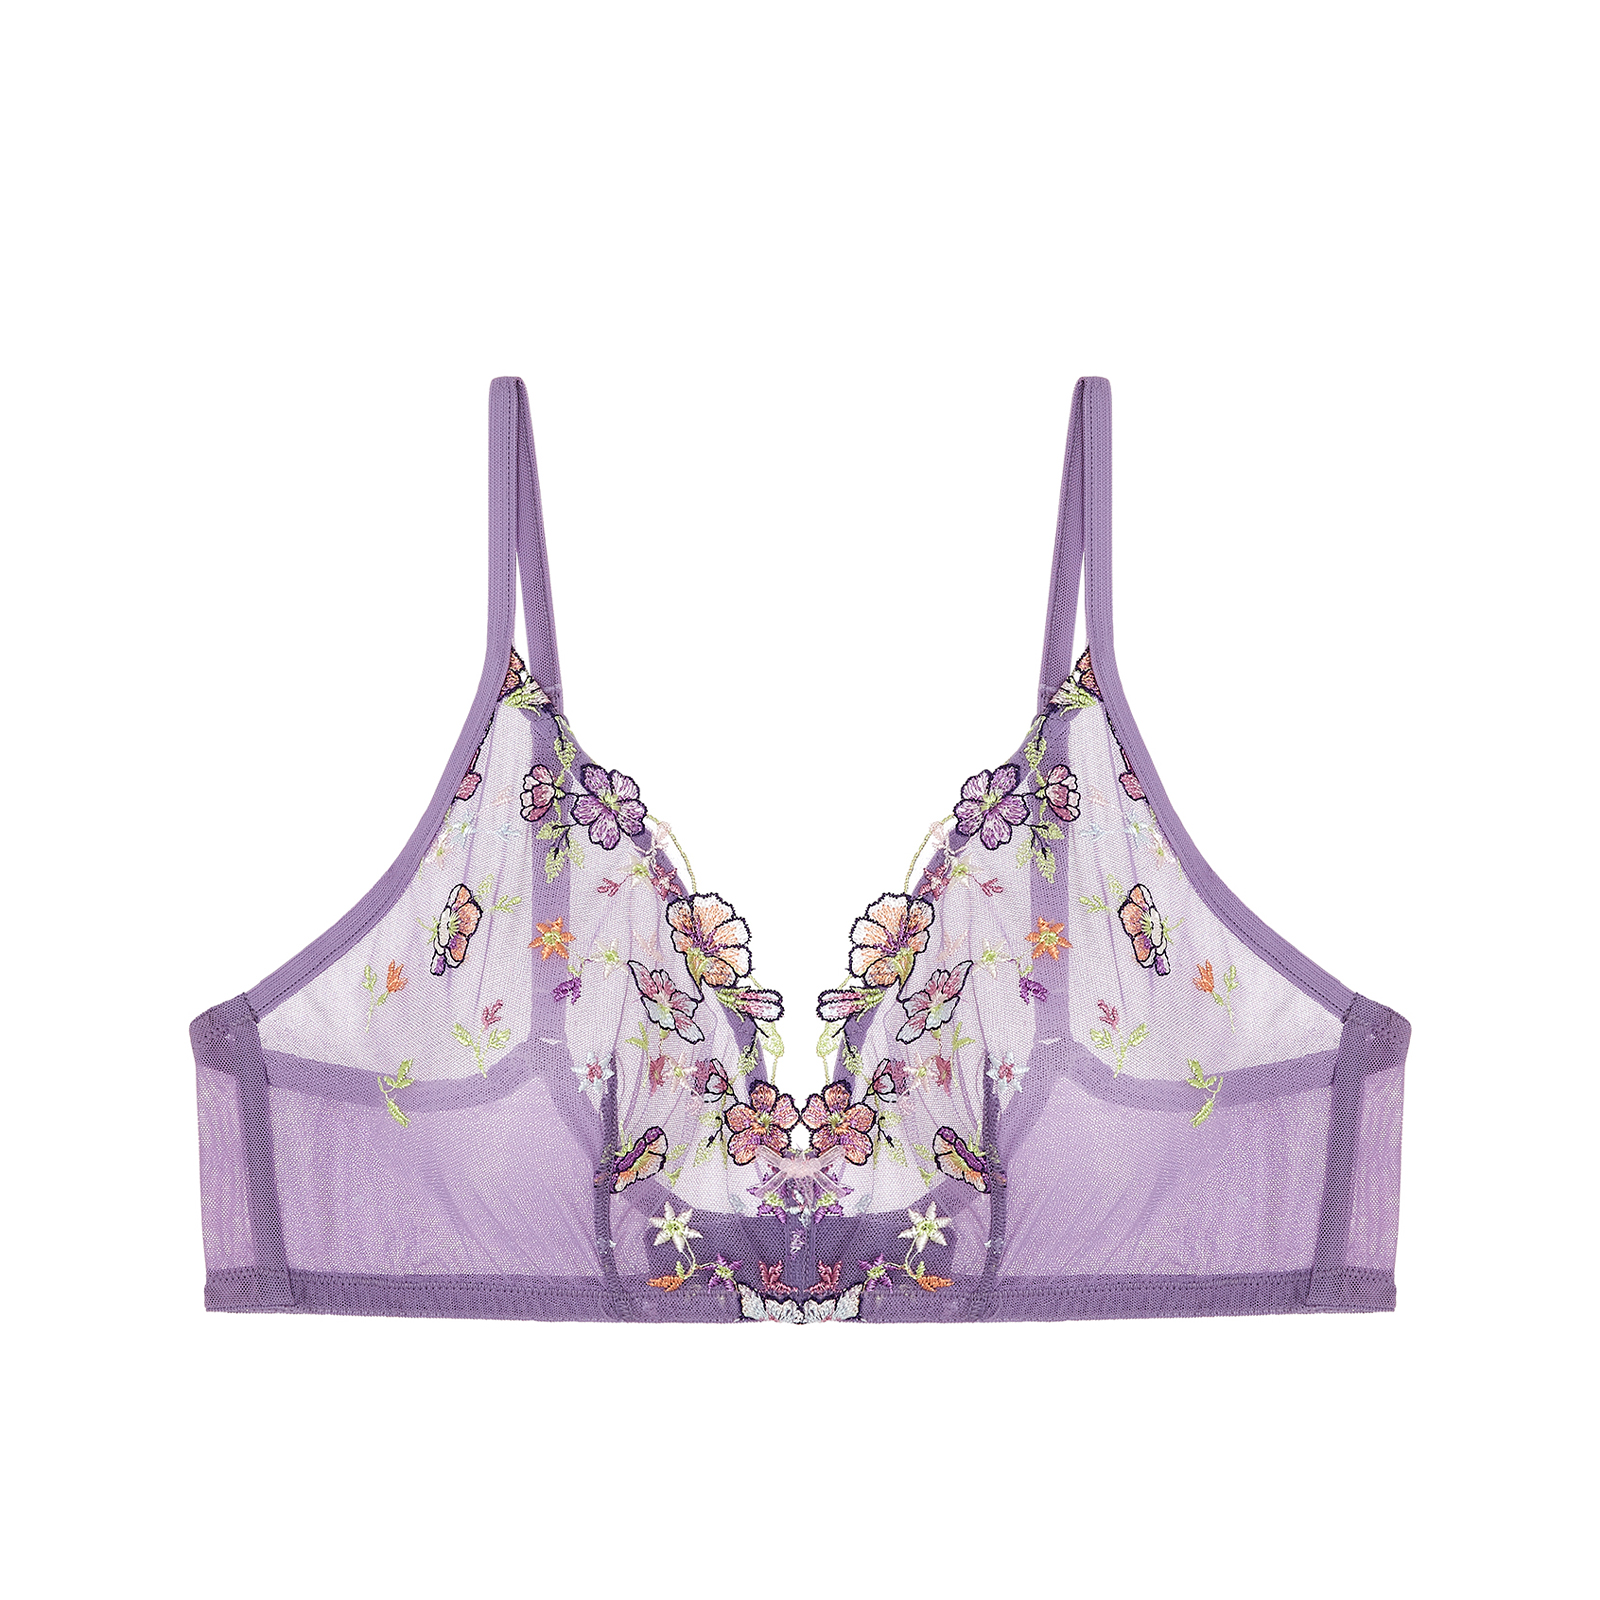 ALL LACE CLASSIC UNDERWIRE BRA LAVENDER - Samantha Chang